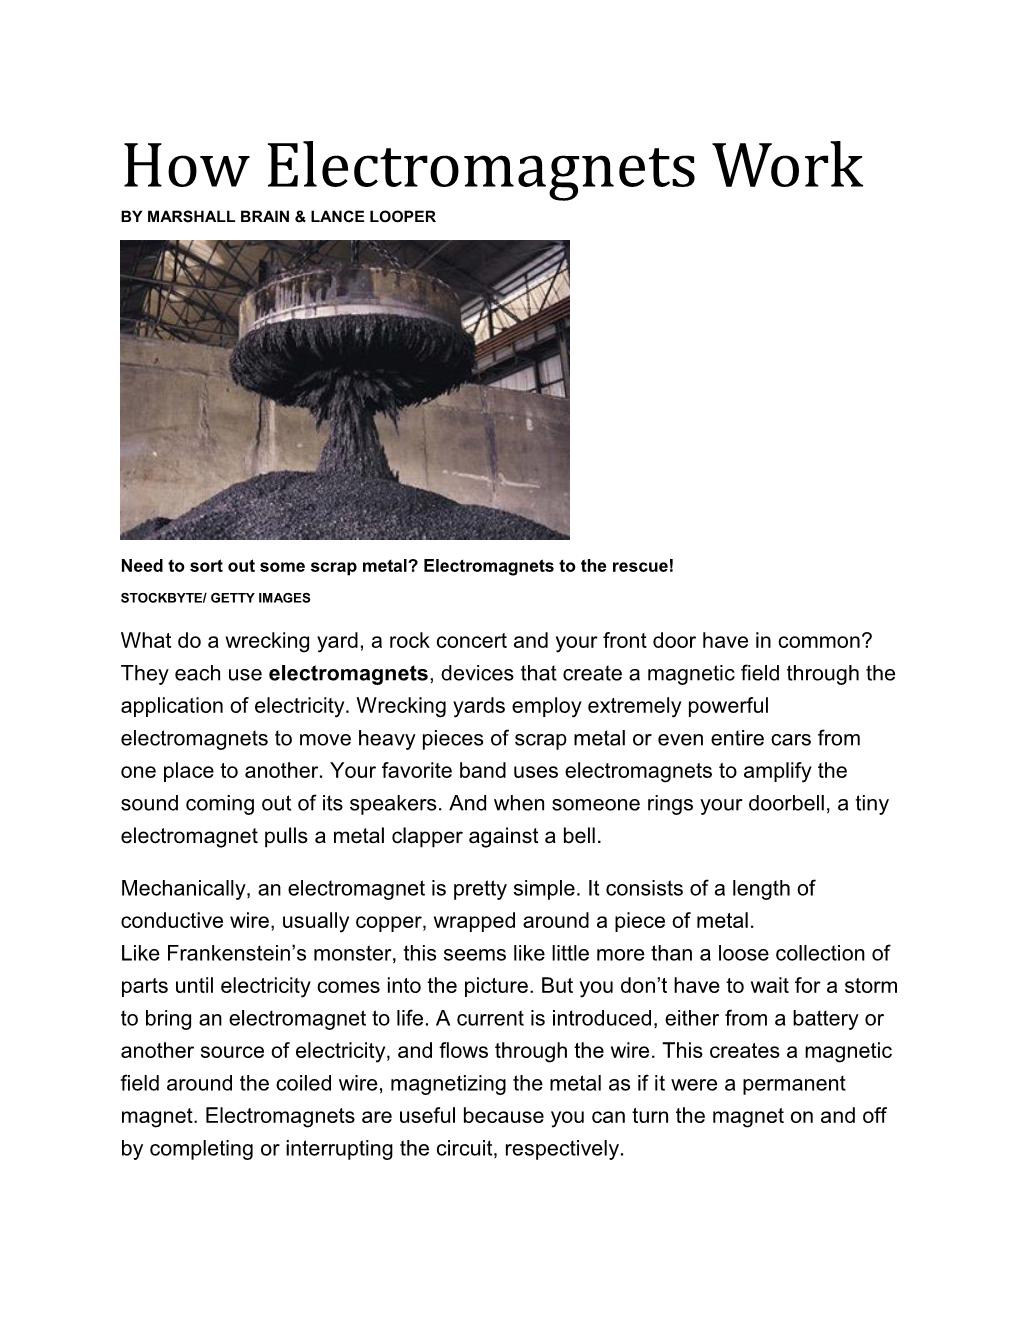 How Electromagnets Work by MARSHALL BRAIN & LANCE LOOPER